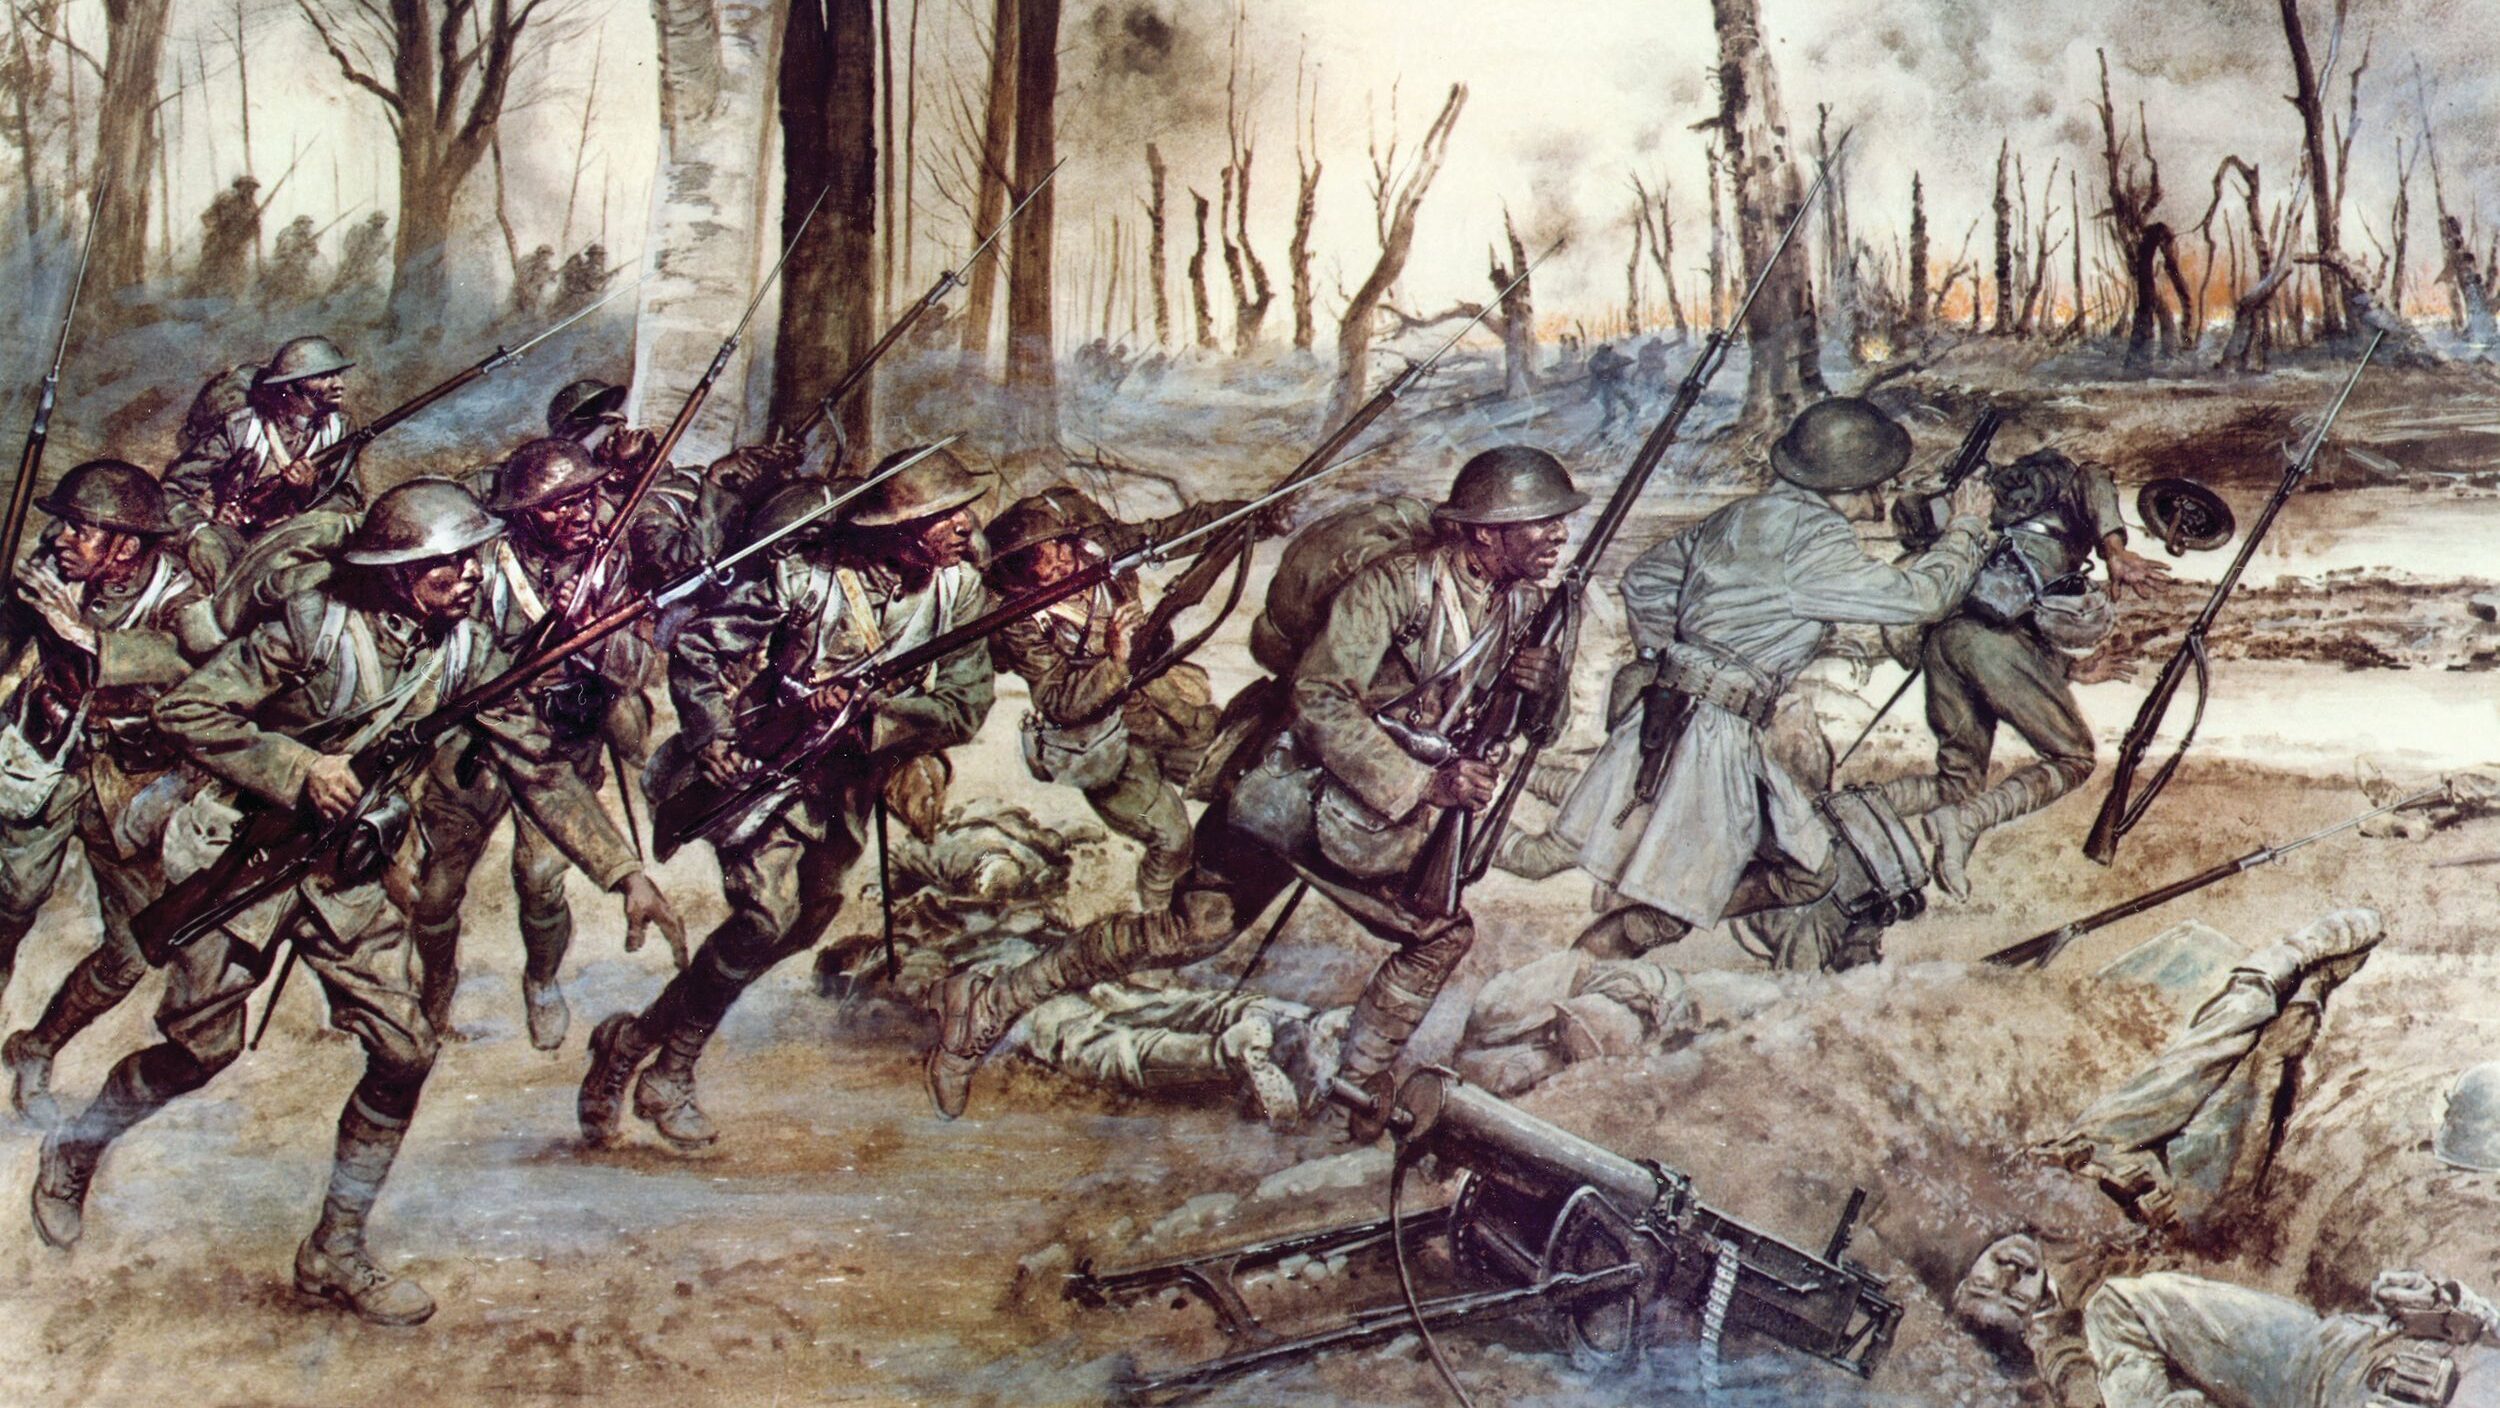 Soldiers of the 369th Infantry charge a German position during the Meuse-Argonne Offensive on September 29, 1918, in “Hell Fighters from Harlem,” by H. Charles McBarron. The village of Séchault was taken, earning the Croix de Guerre for the entire regiment, which lost nearly a third of its men in the offensive.